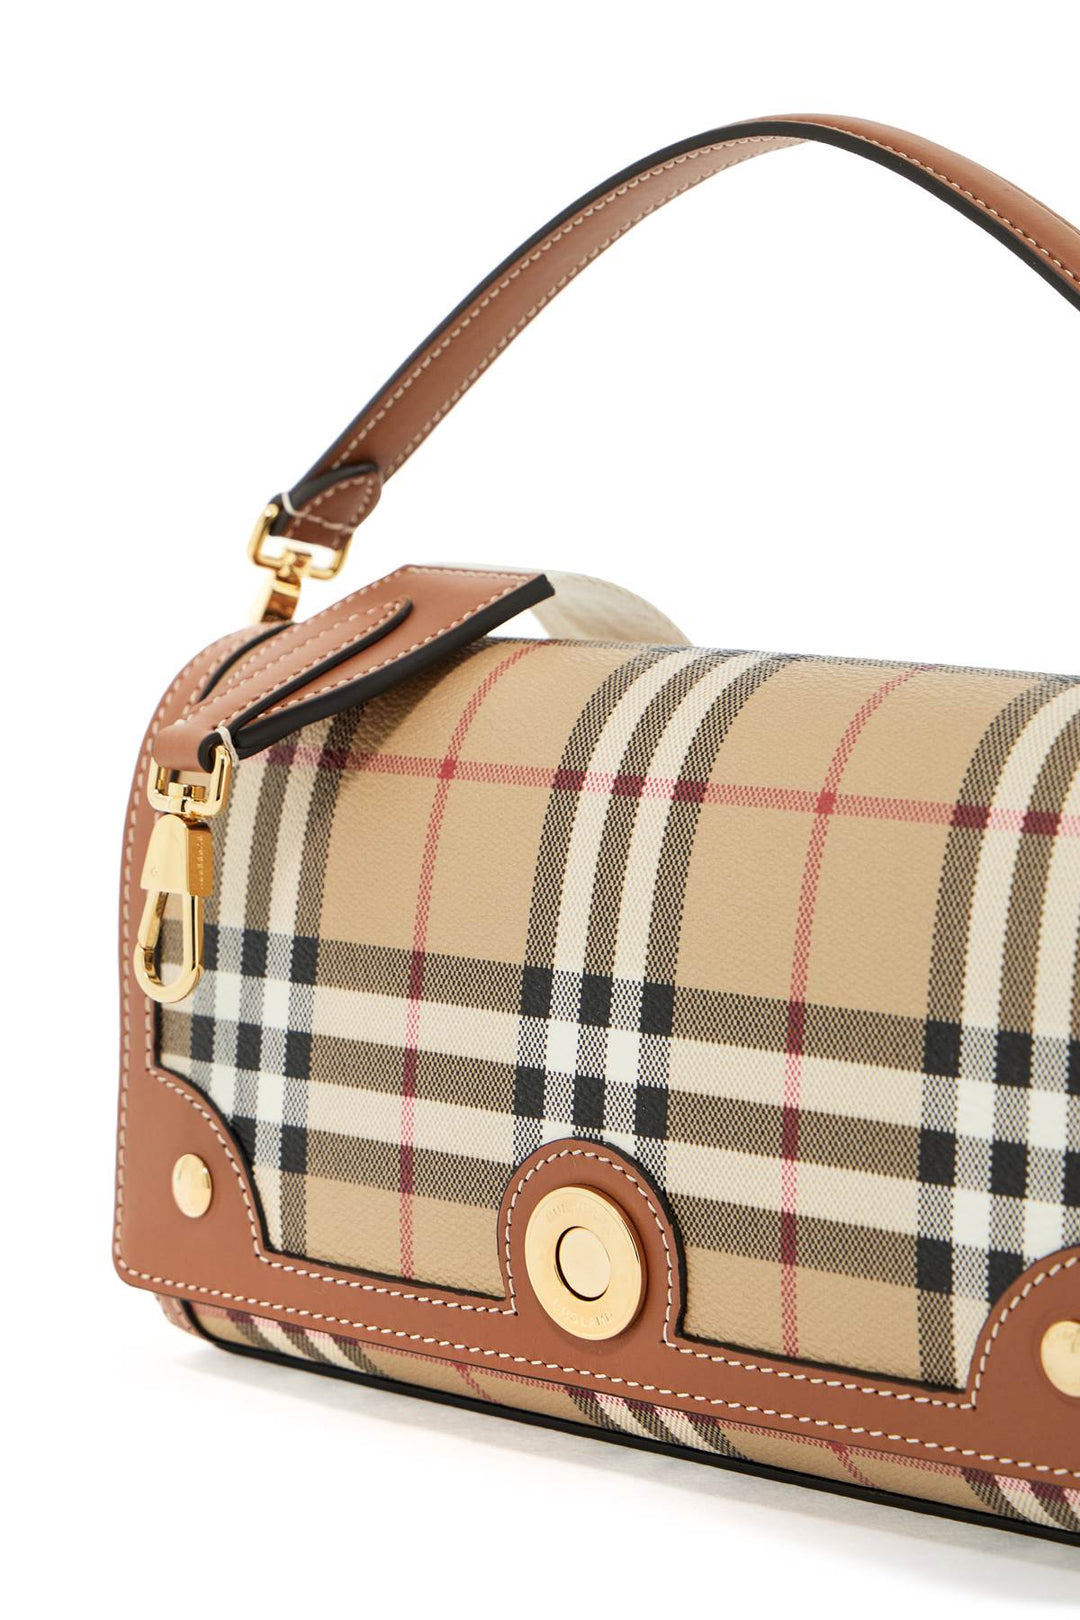 Burberry Shoulder Bag With Check Pattern Notes   Beige